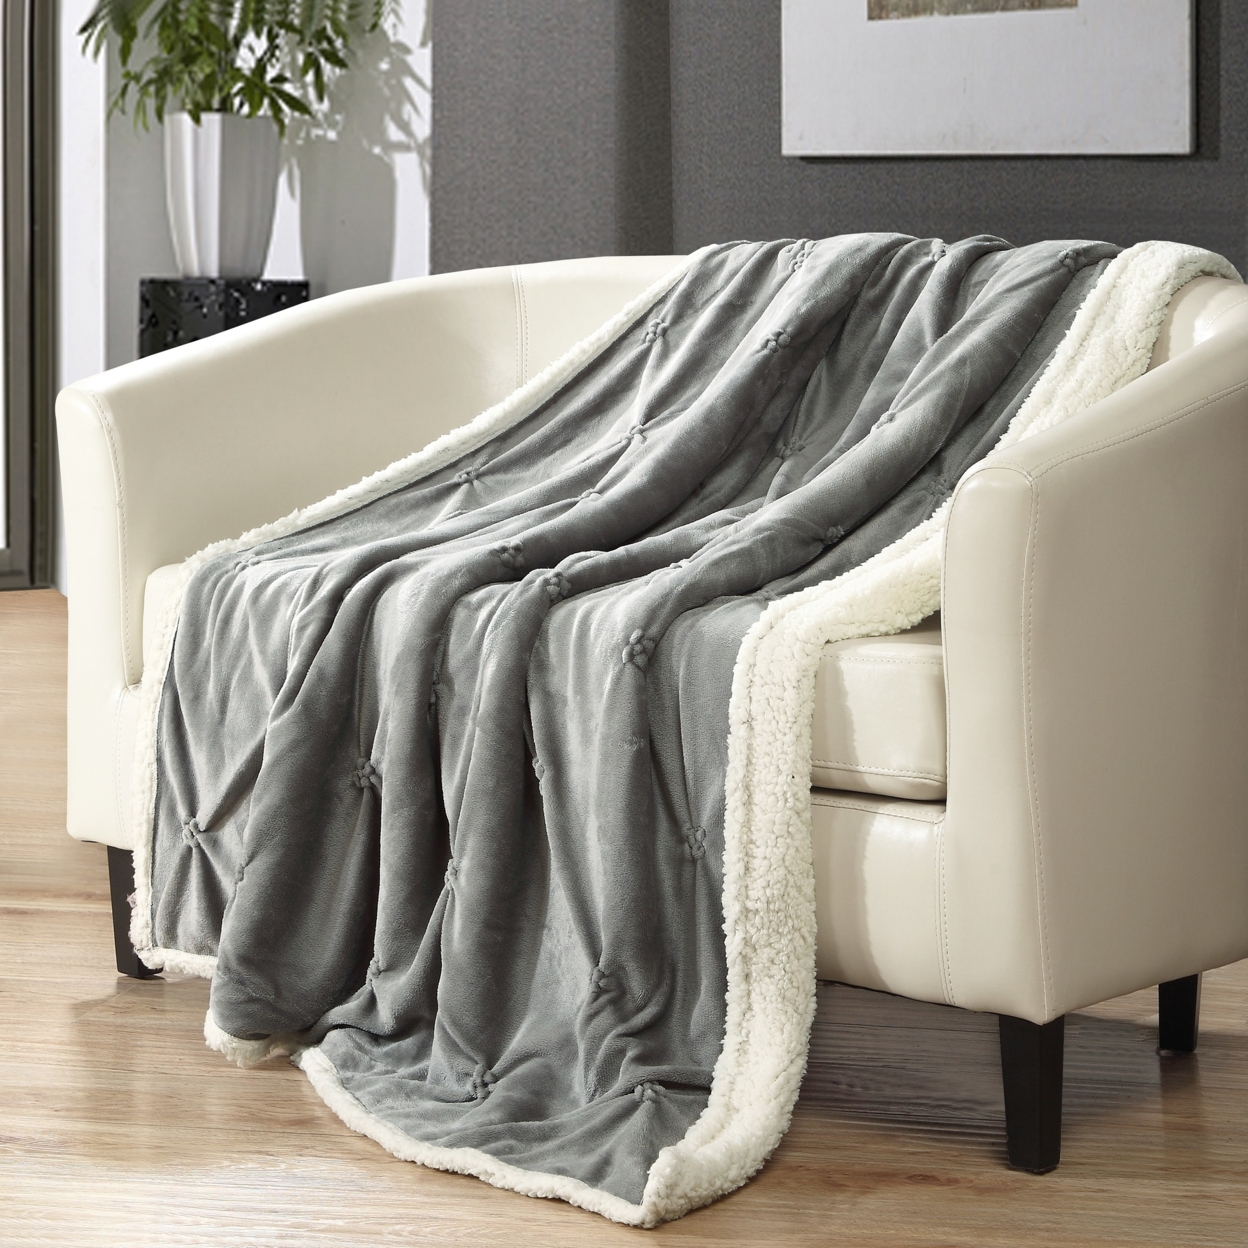 Chic Home Alejandro Throw Blanket Cozy Super Soft Ultra Plush Micromink Sherpa Backing Grey 50X60 - Gray